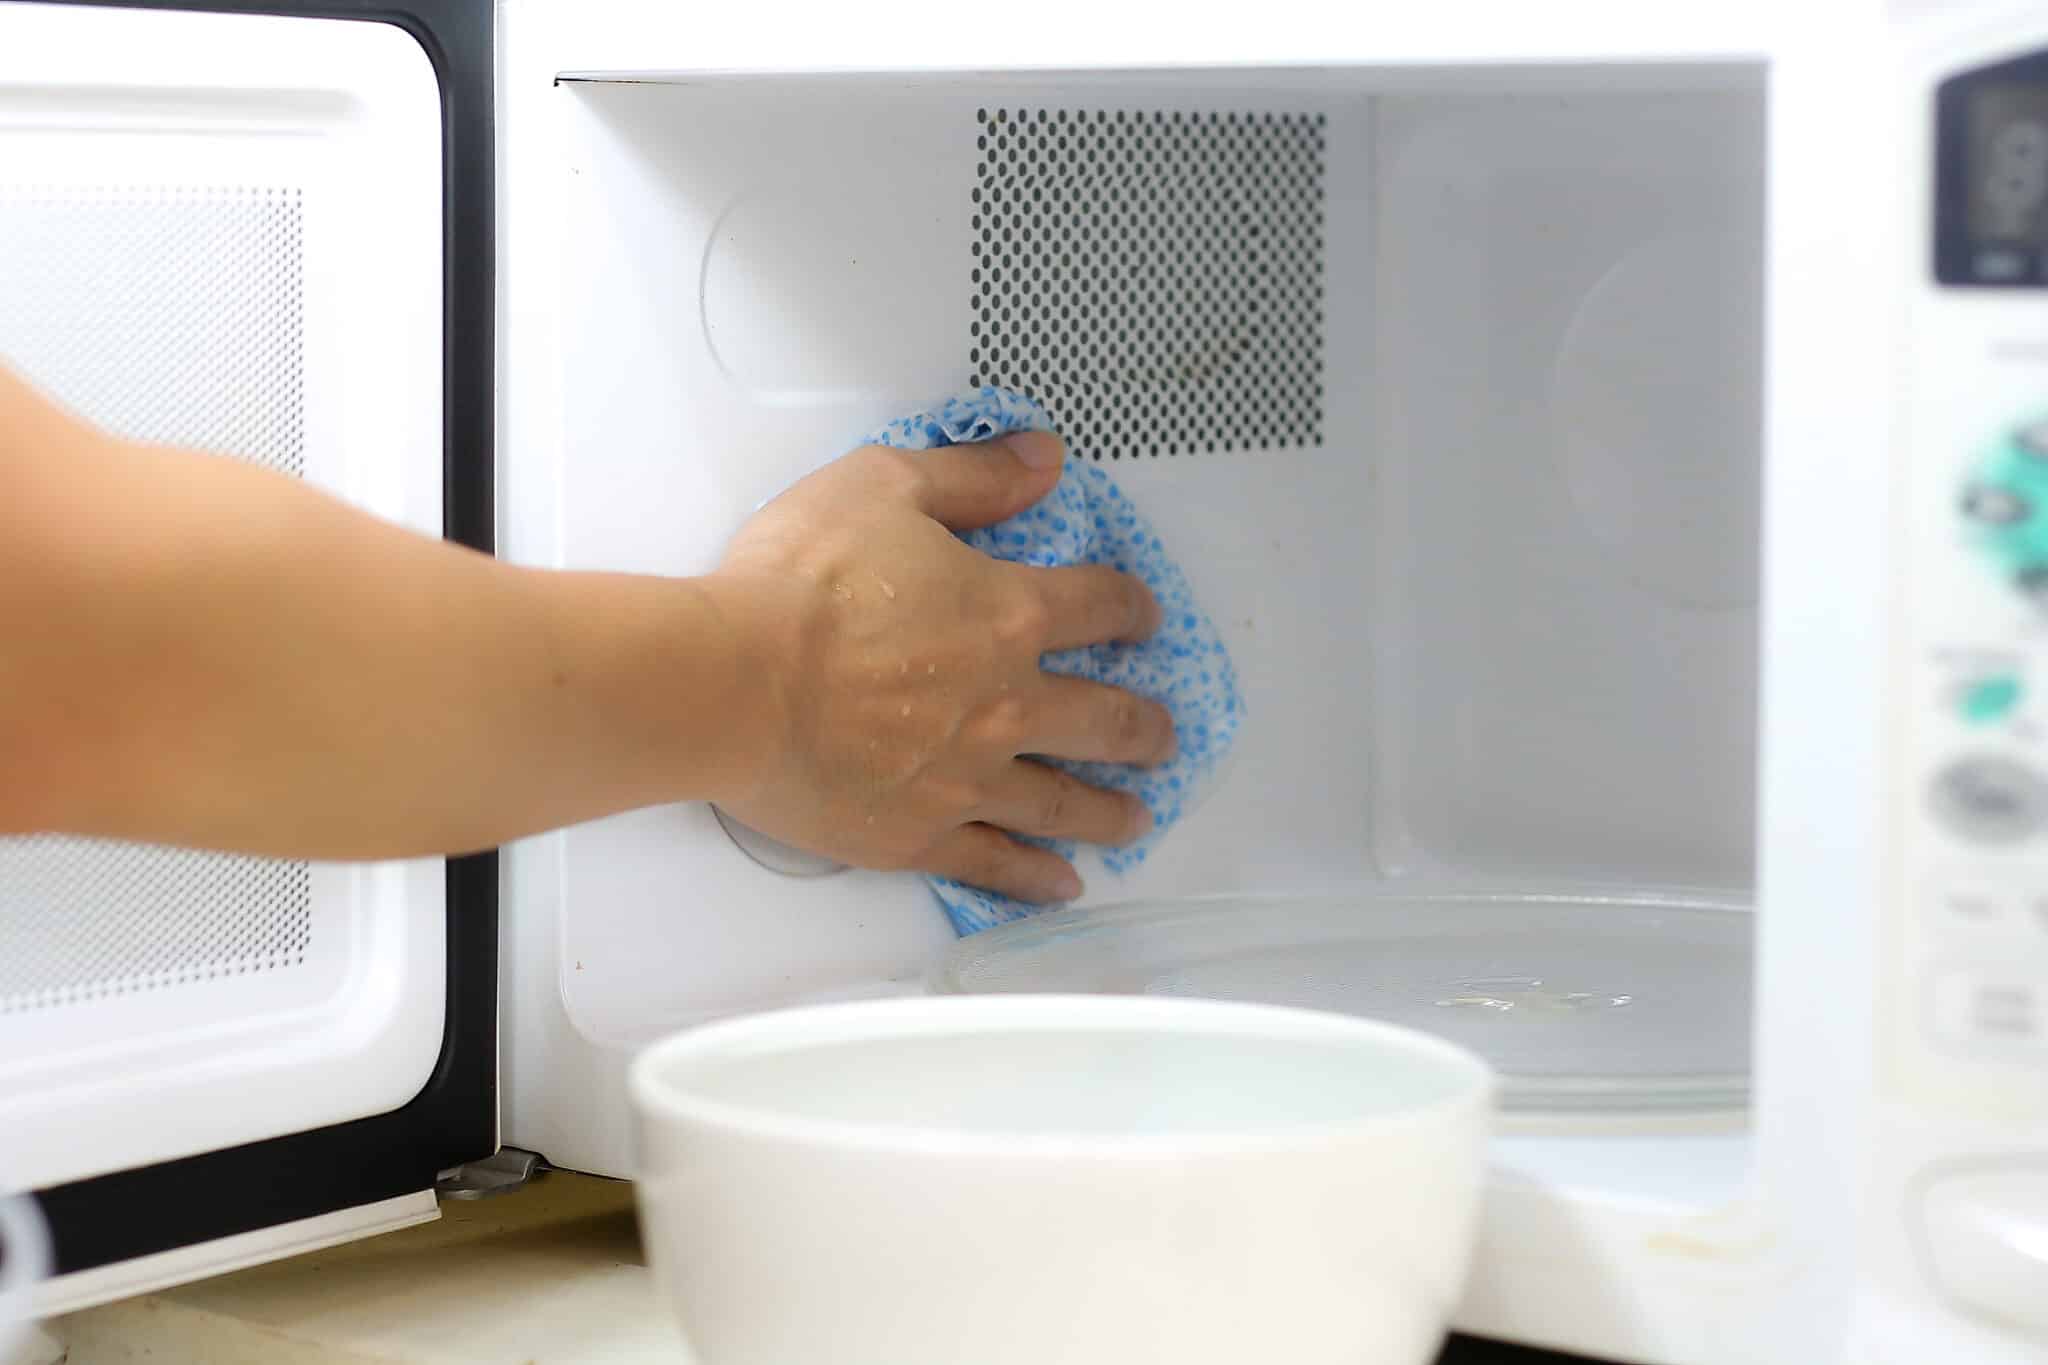 How Often Should I Clean My Microwave? - It’s More Often Than You Think